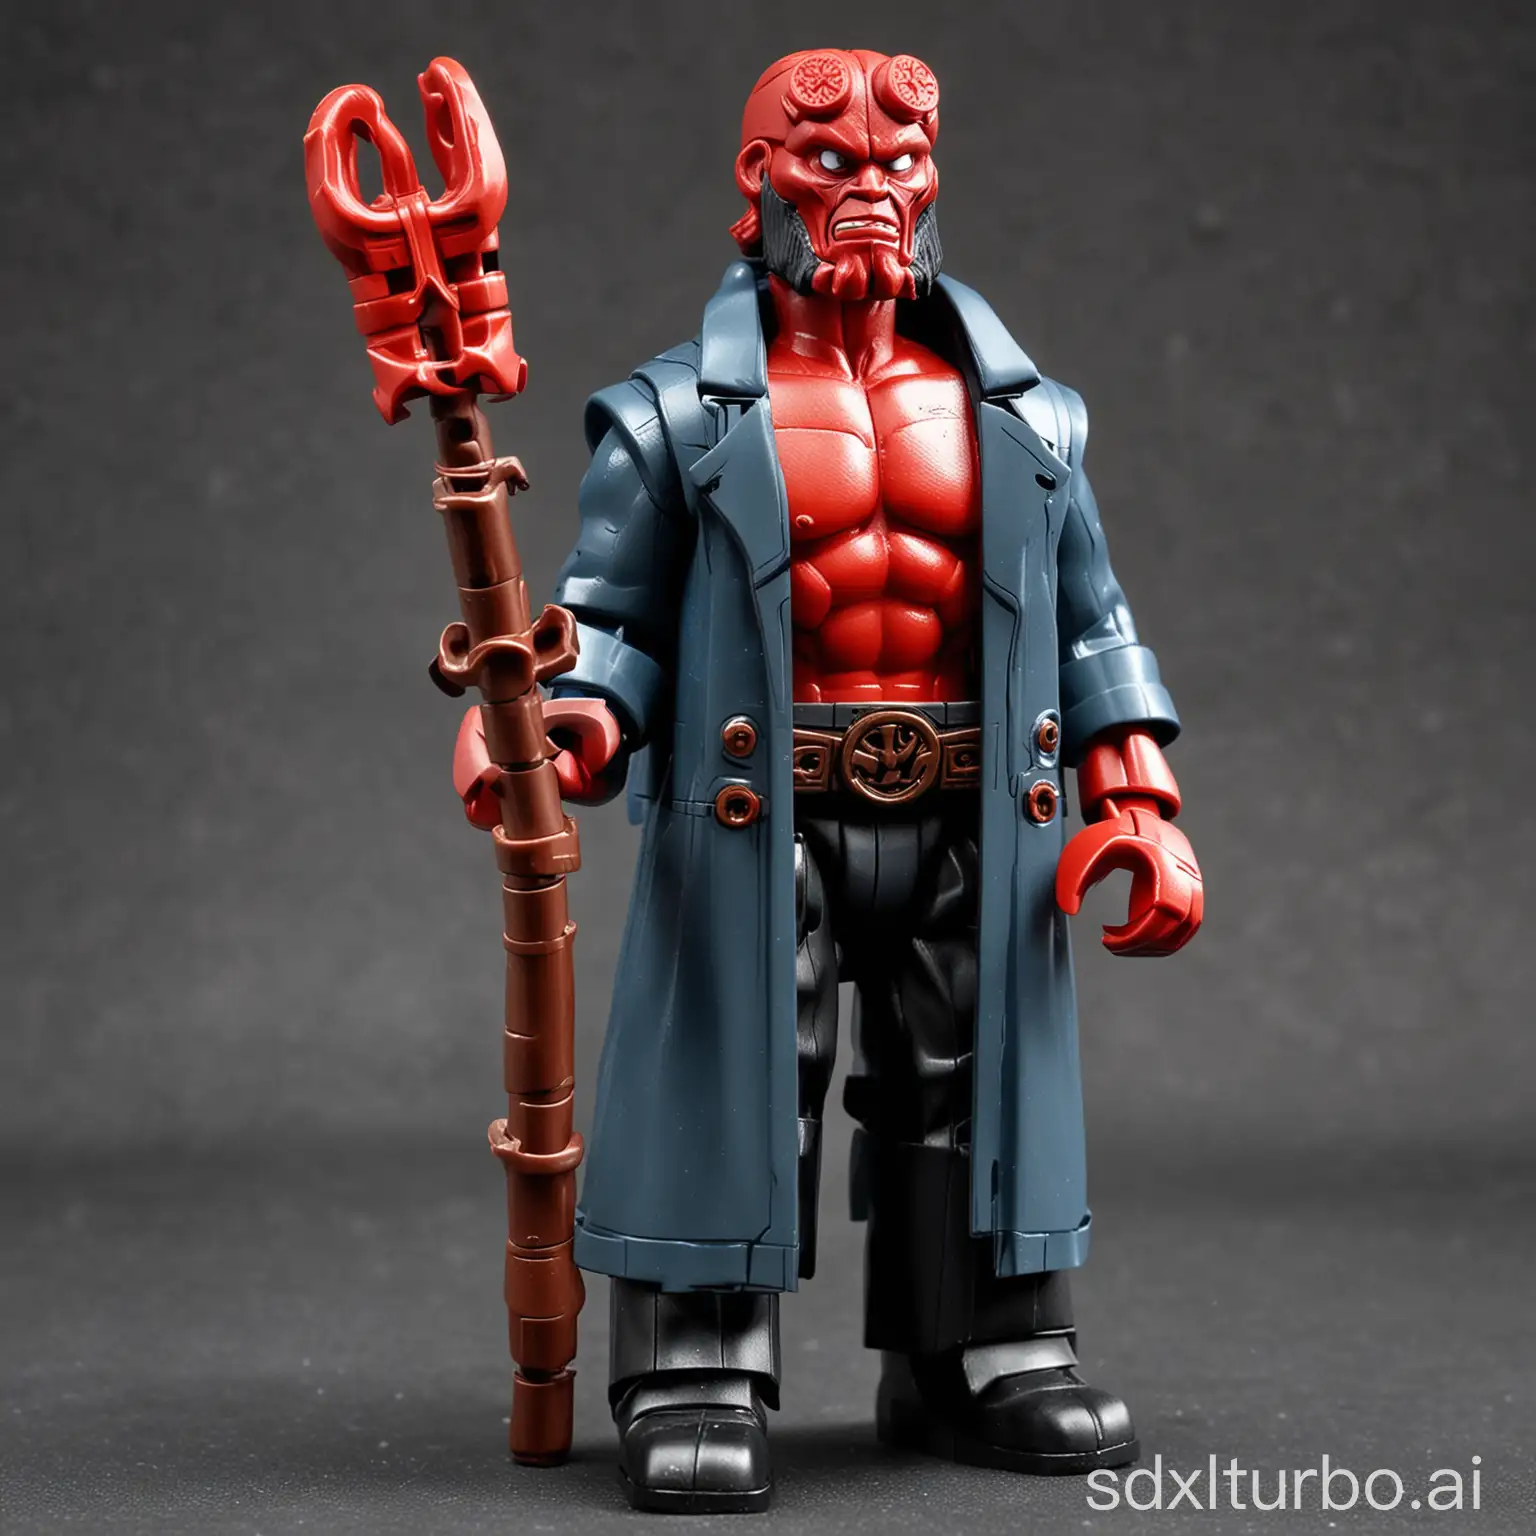 Hellboy-Lego-Figure-Detailed-Sculpture-of-Comic-Character-in-Miniature-Form